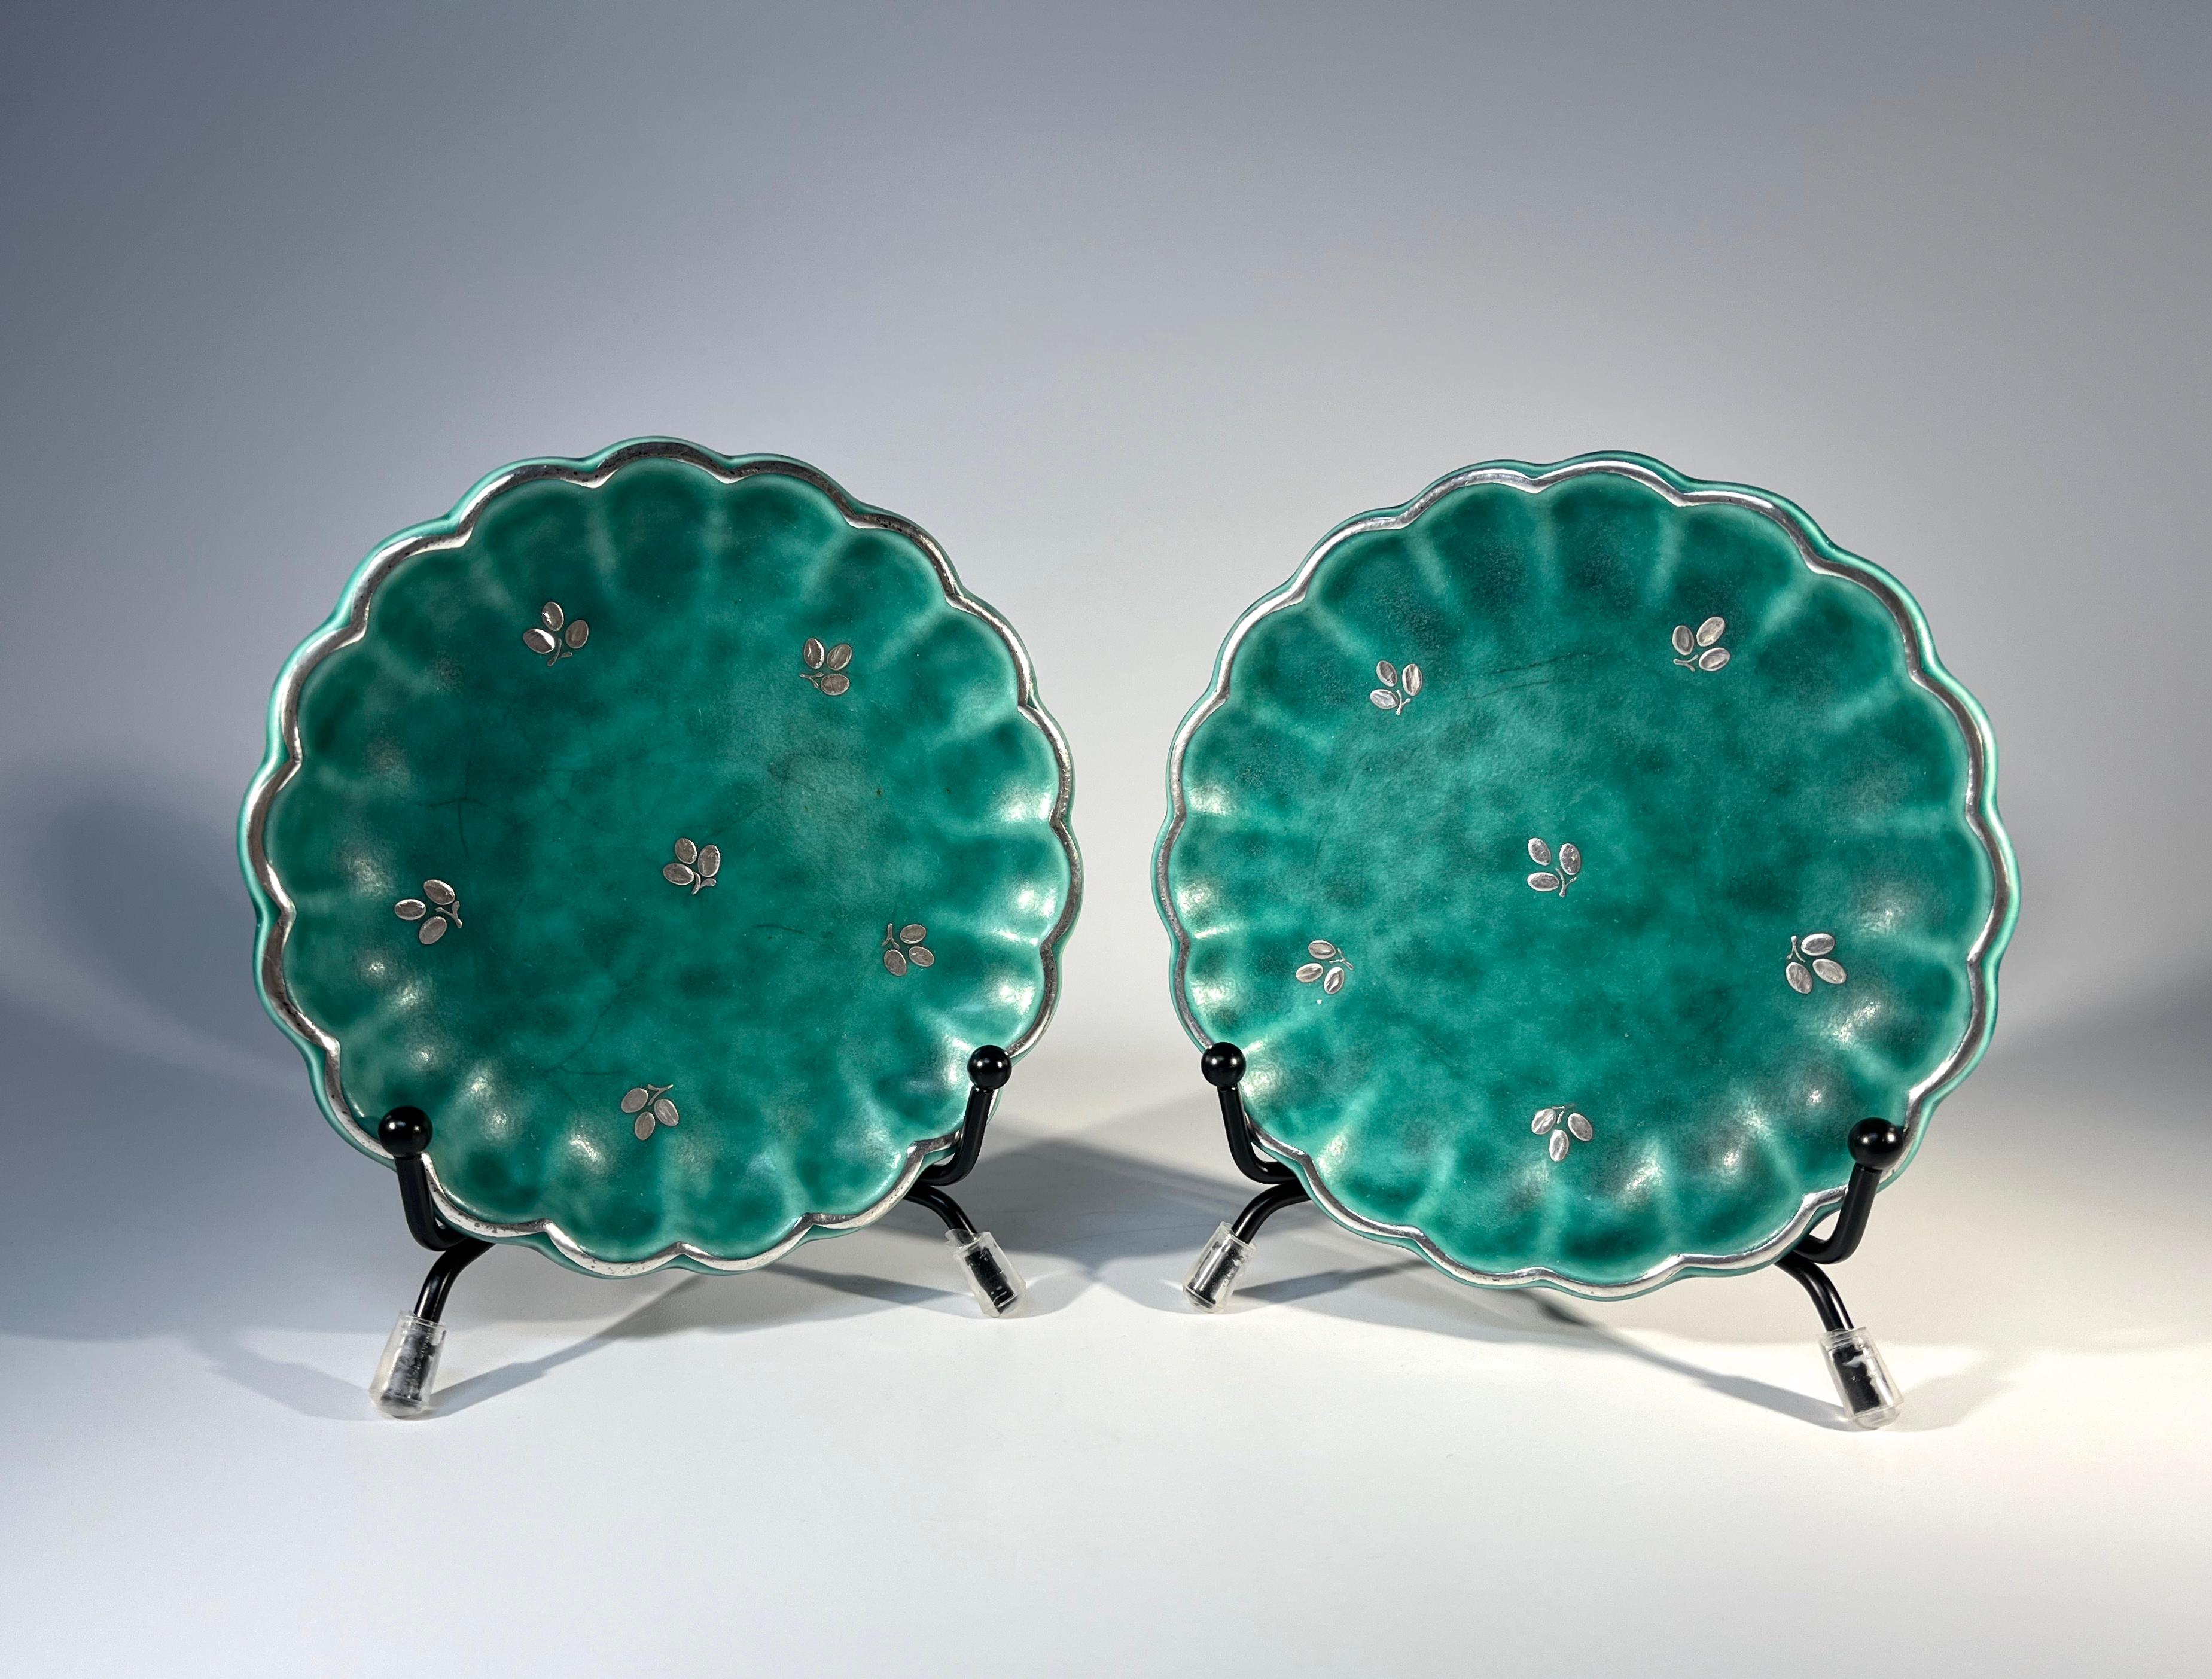 Delightful pair of scalloped edged stoneware pin trays by Wilhelm Kage for Gustavsberg, Sweden. 
Applied silver scalloped rim and trefoil flower sprigs decoration on signature Argenta green mottled stoneware
Circa 1960's
Stamped Gustavsberg Argenta